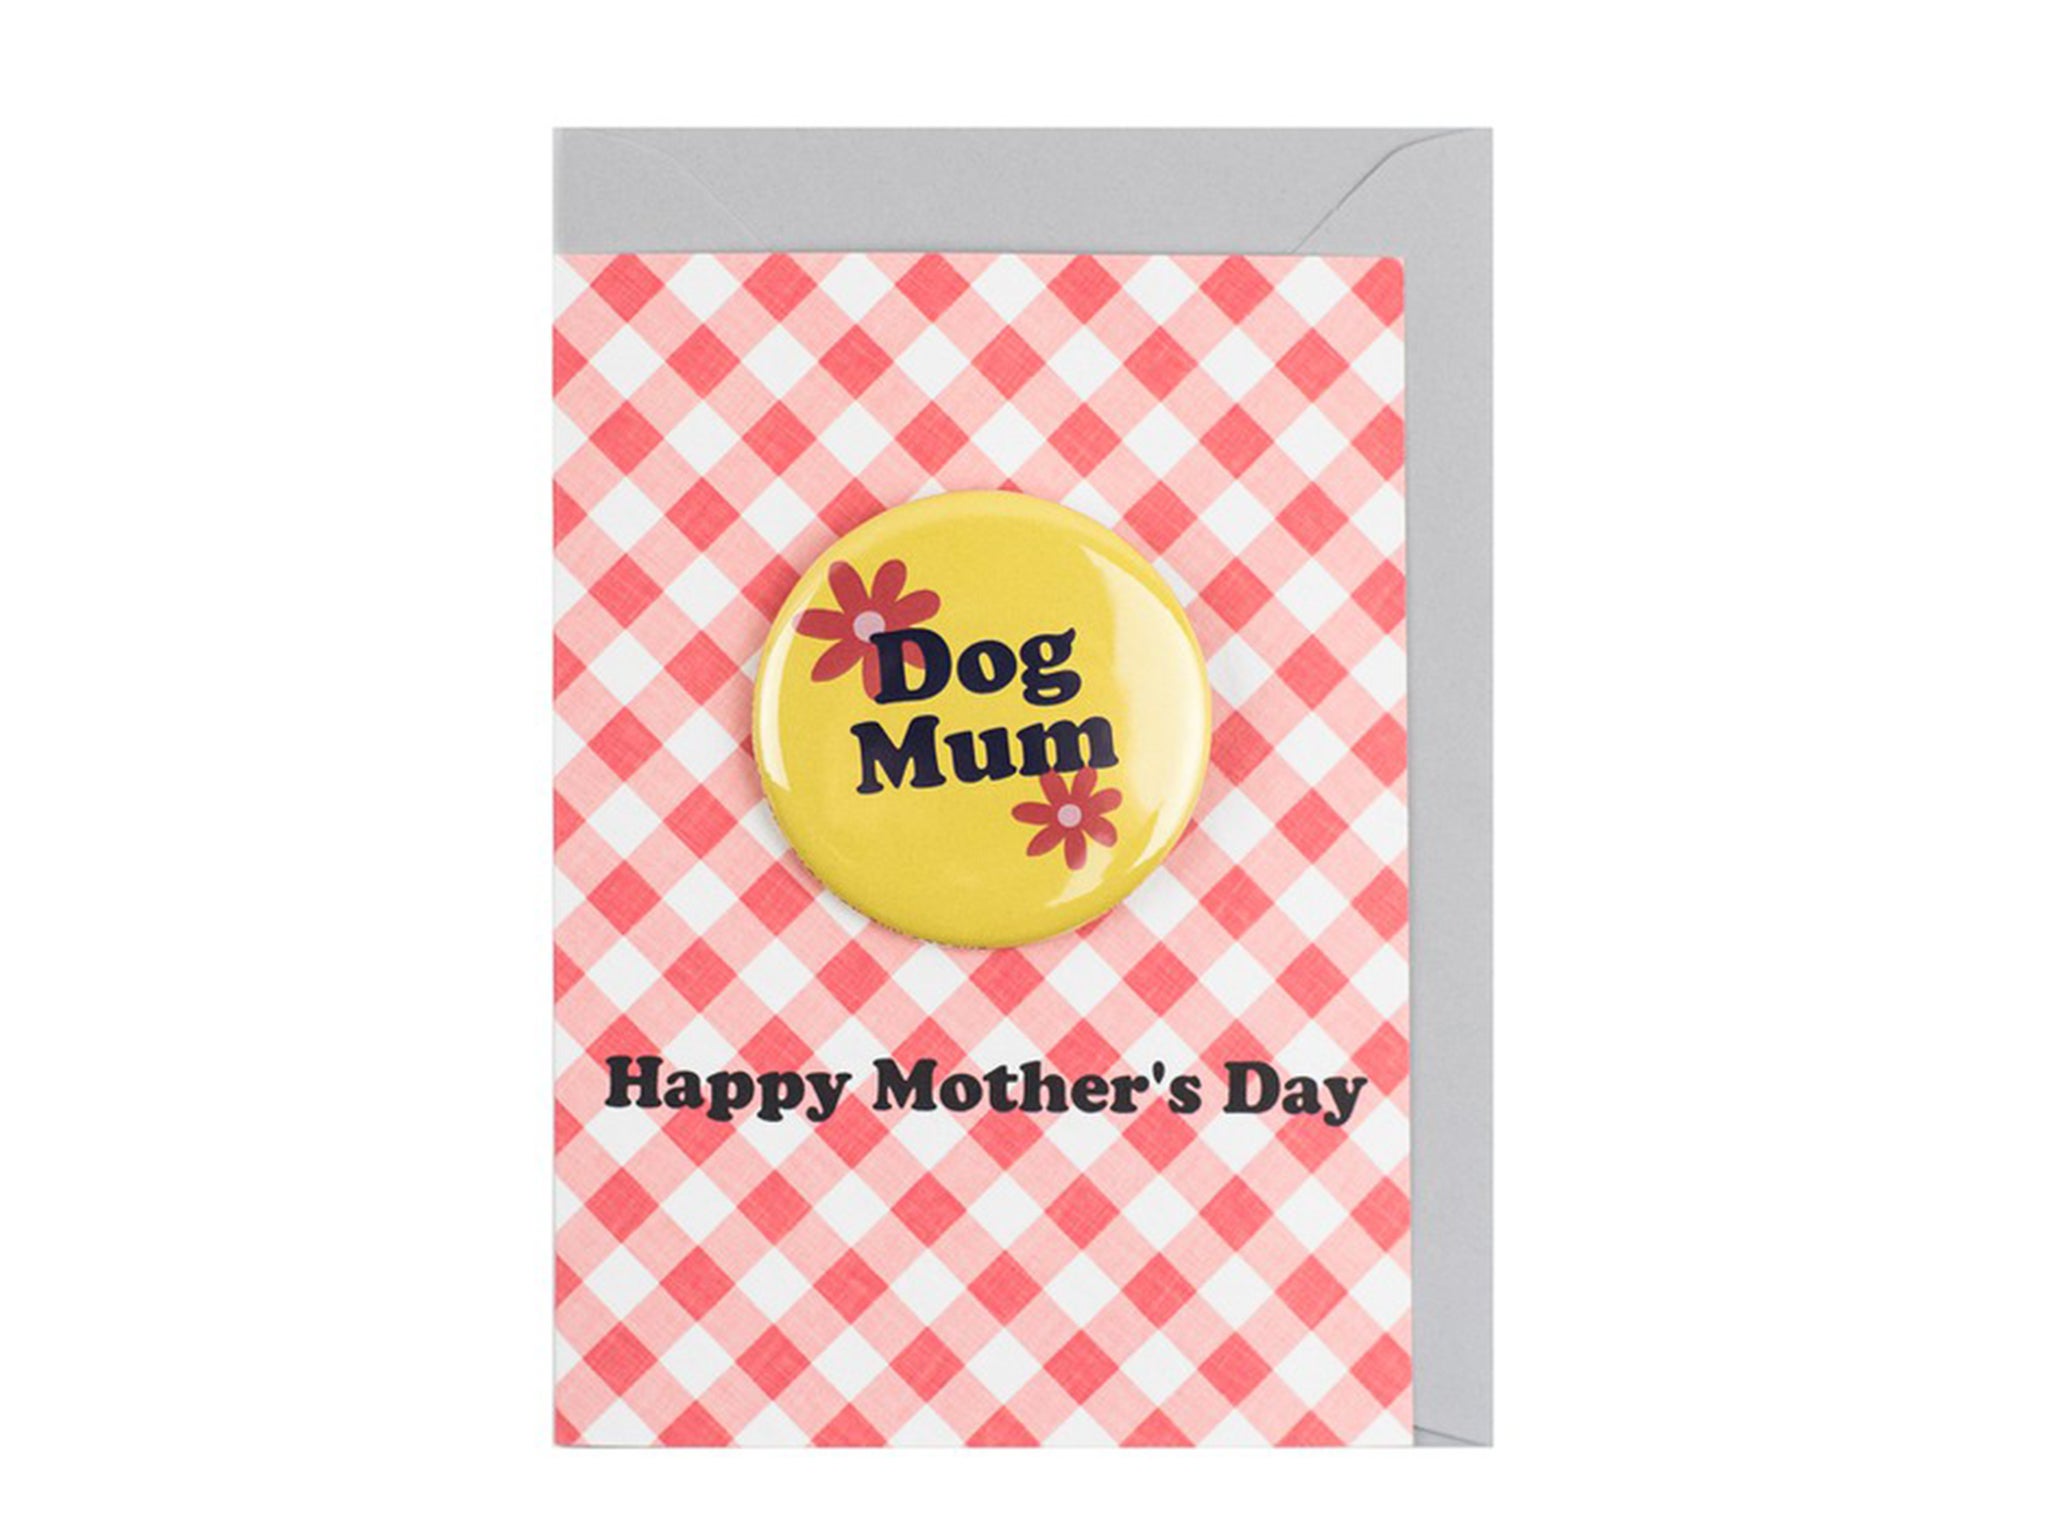 happy-mothers-day-card-from-dog-indybest.jpg